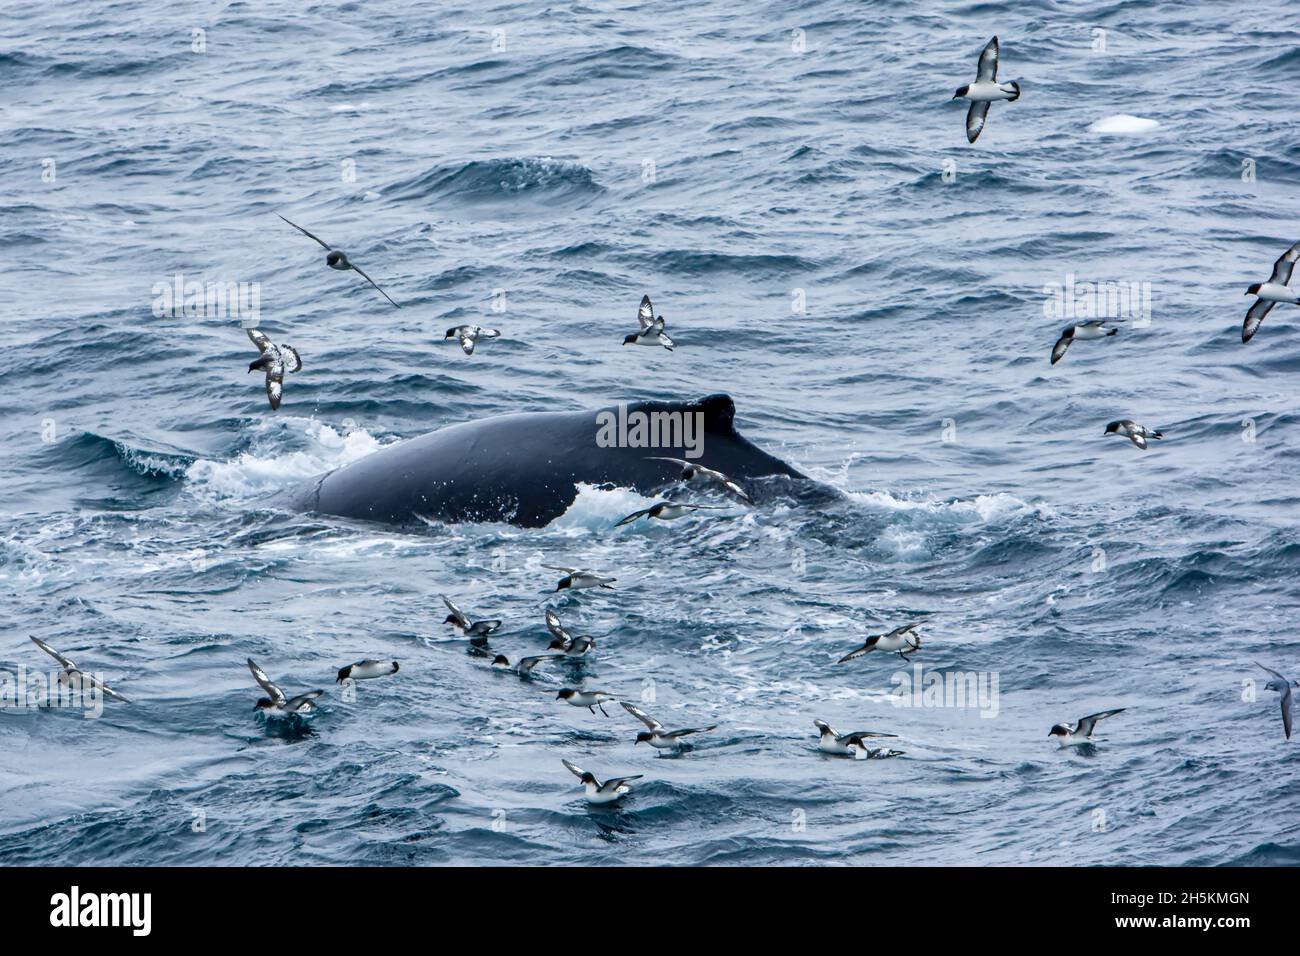 Humpback whale and pintado petrels at the surface of the water. Stock Photo